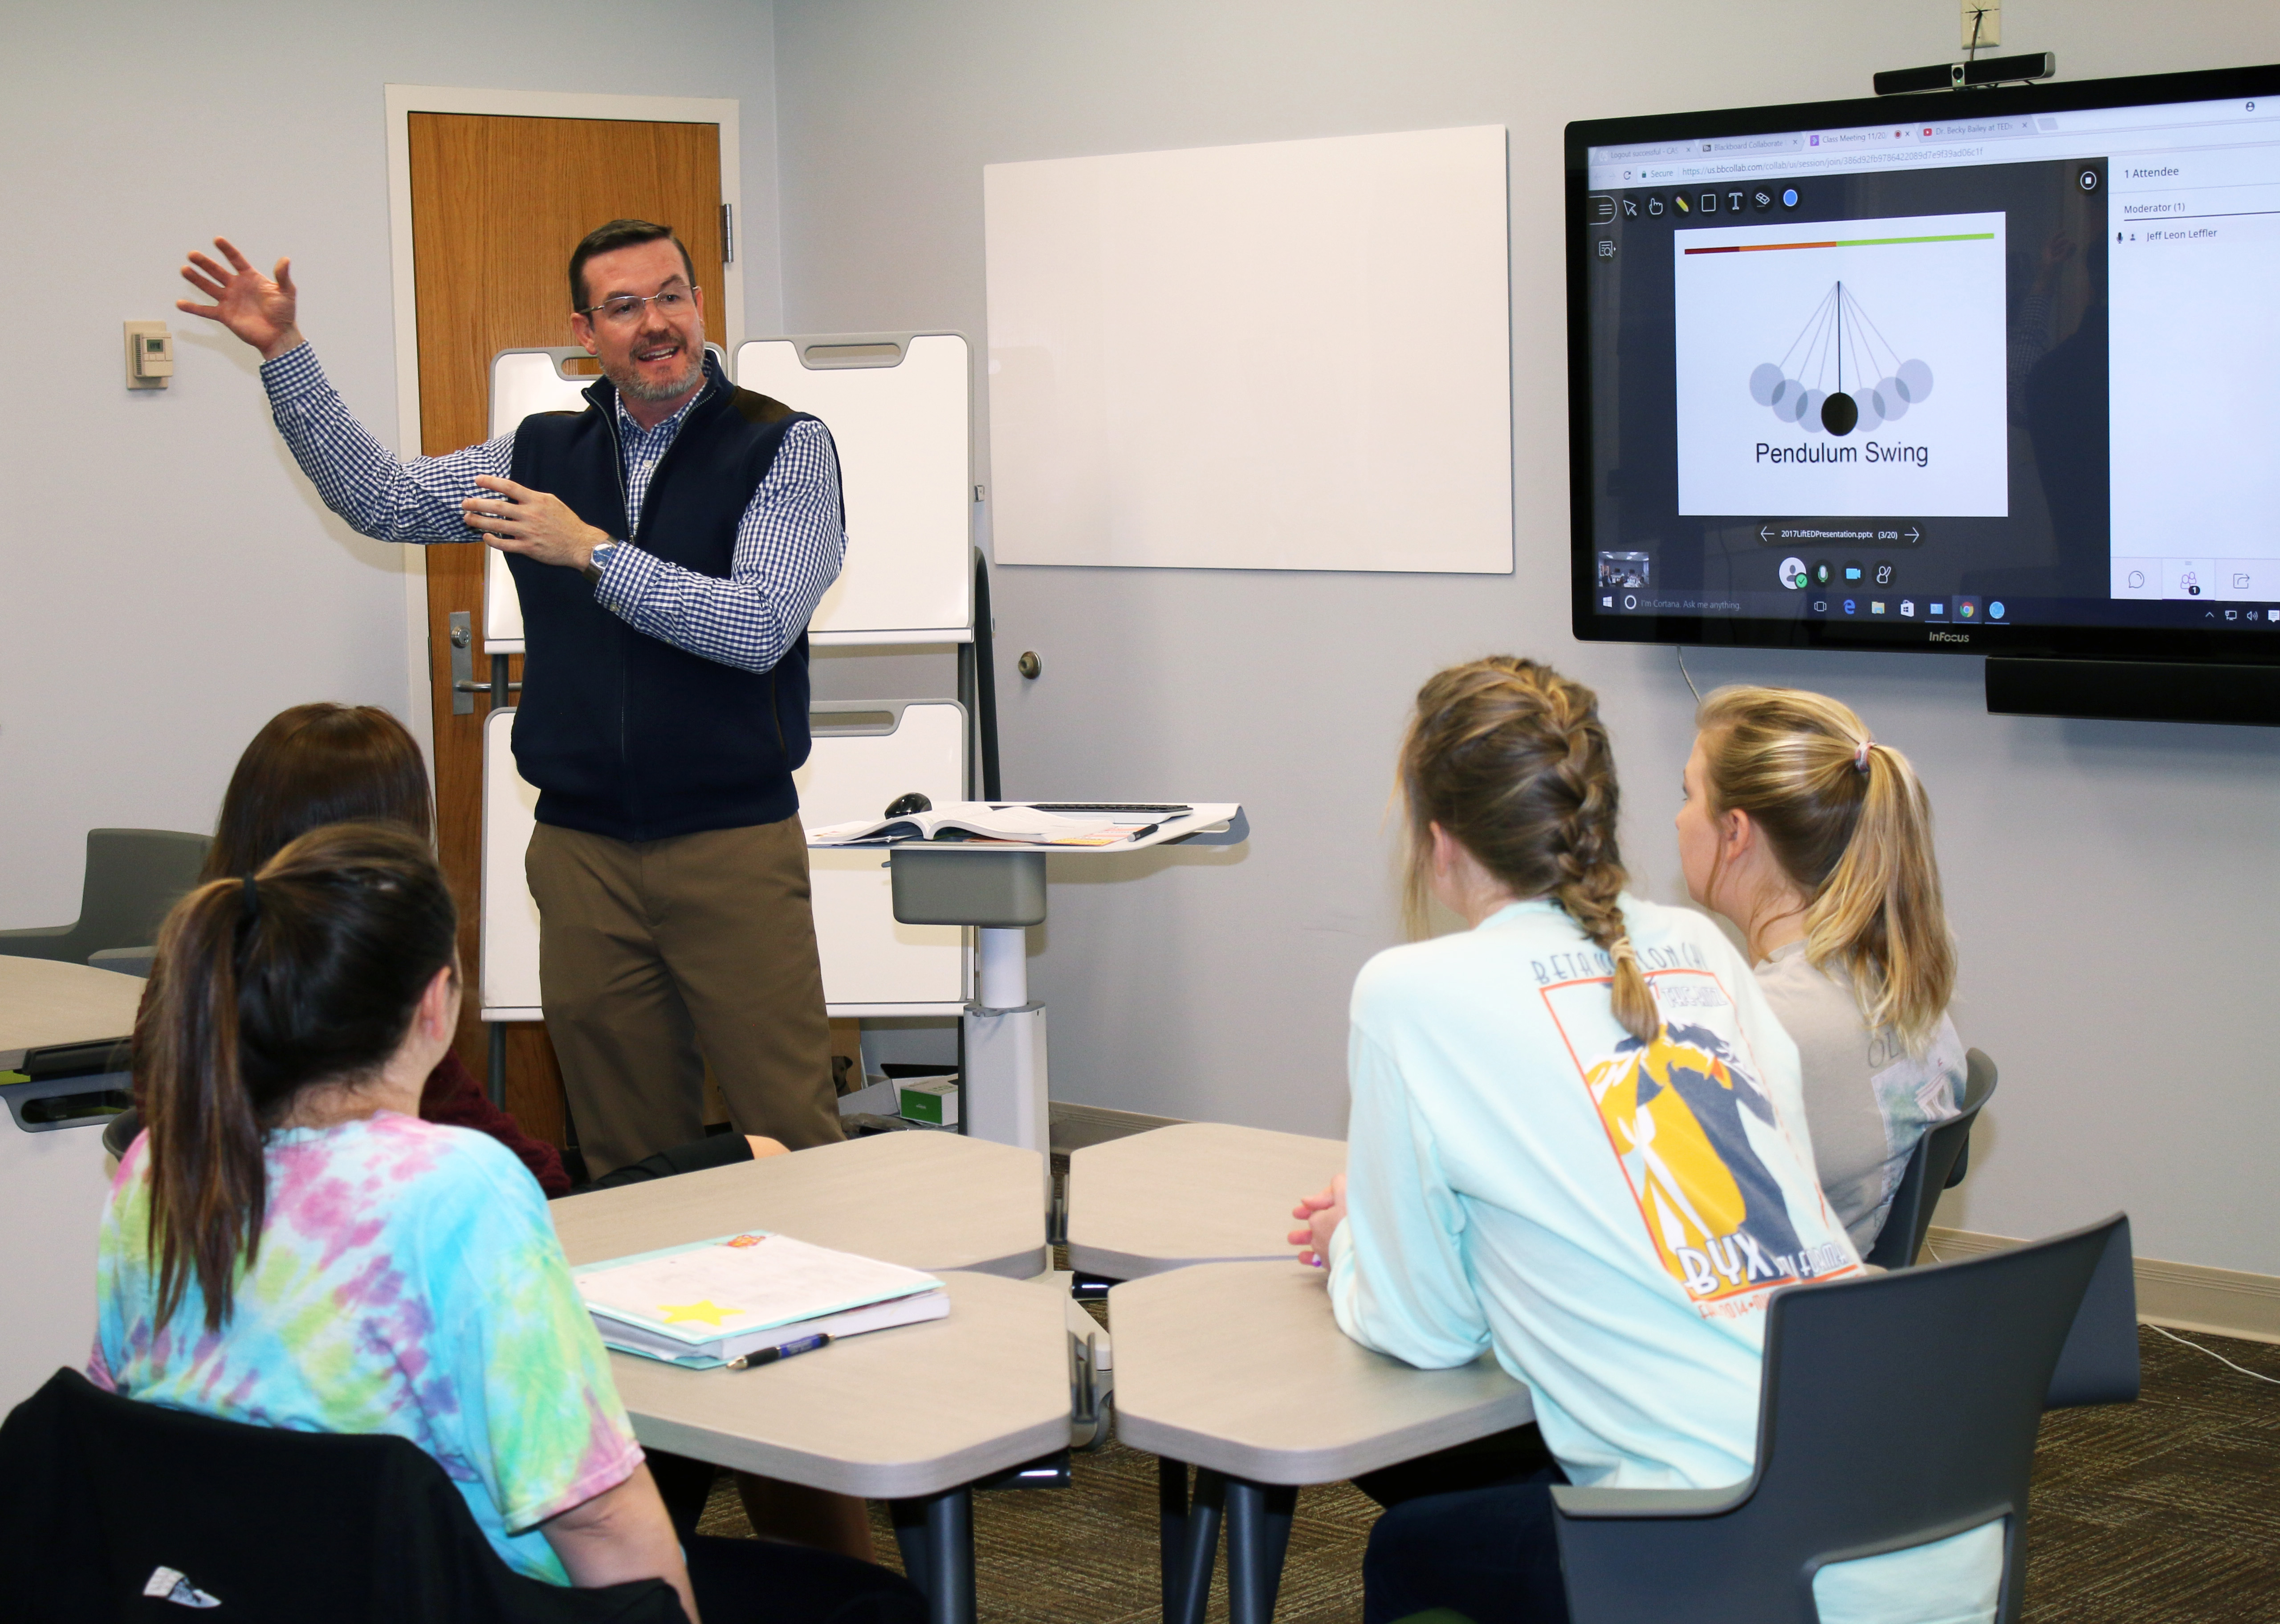 Dr. Jeff Leffler, assistant professor of elementary education and director of Graduate Studies for MSU-Meridian’s Division of Education, teaches a course in “The Collaboratory.” This classroom creates a new and innovative learning environment offering a blended delivery method for graduate students in elementary and secondary education programs beginning spring 2018.